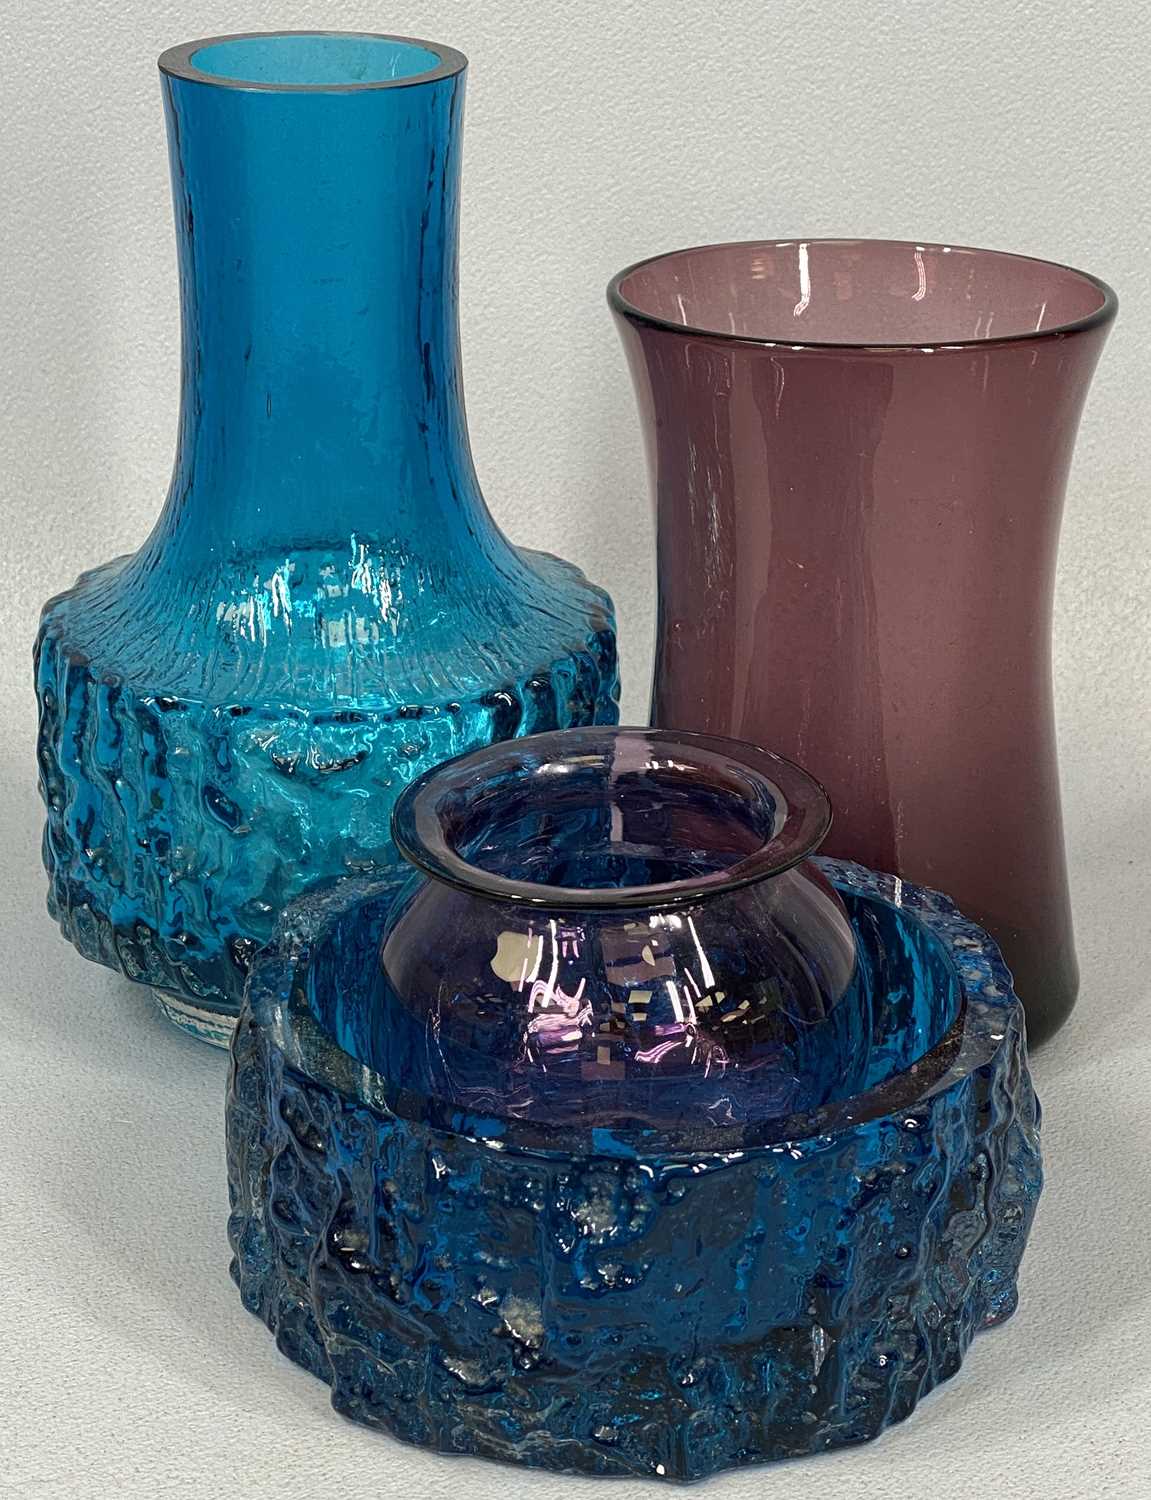 WHITEFRIARS & OTHER GLASSWARE, including turquoise textured vase, 18cms (h) shallow bowl, 13cms ( - Image 4 of 5